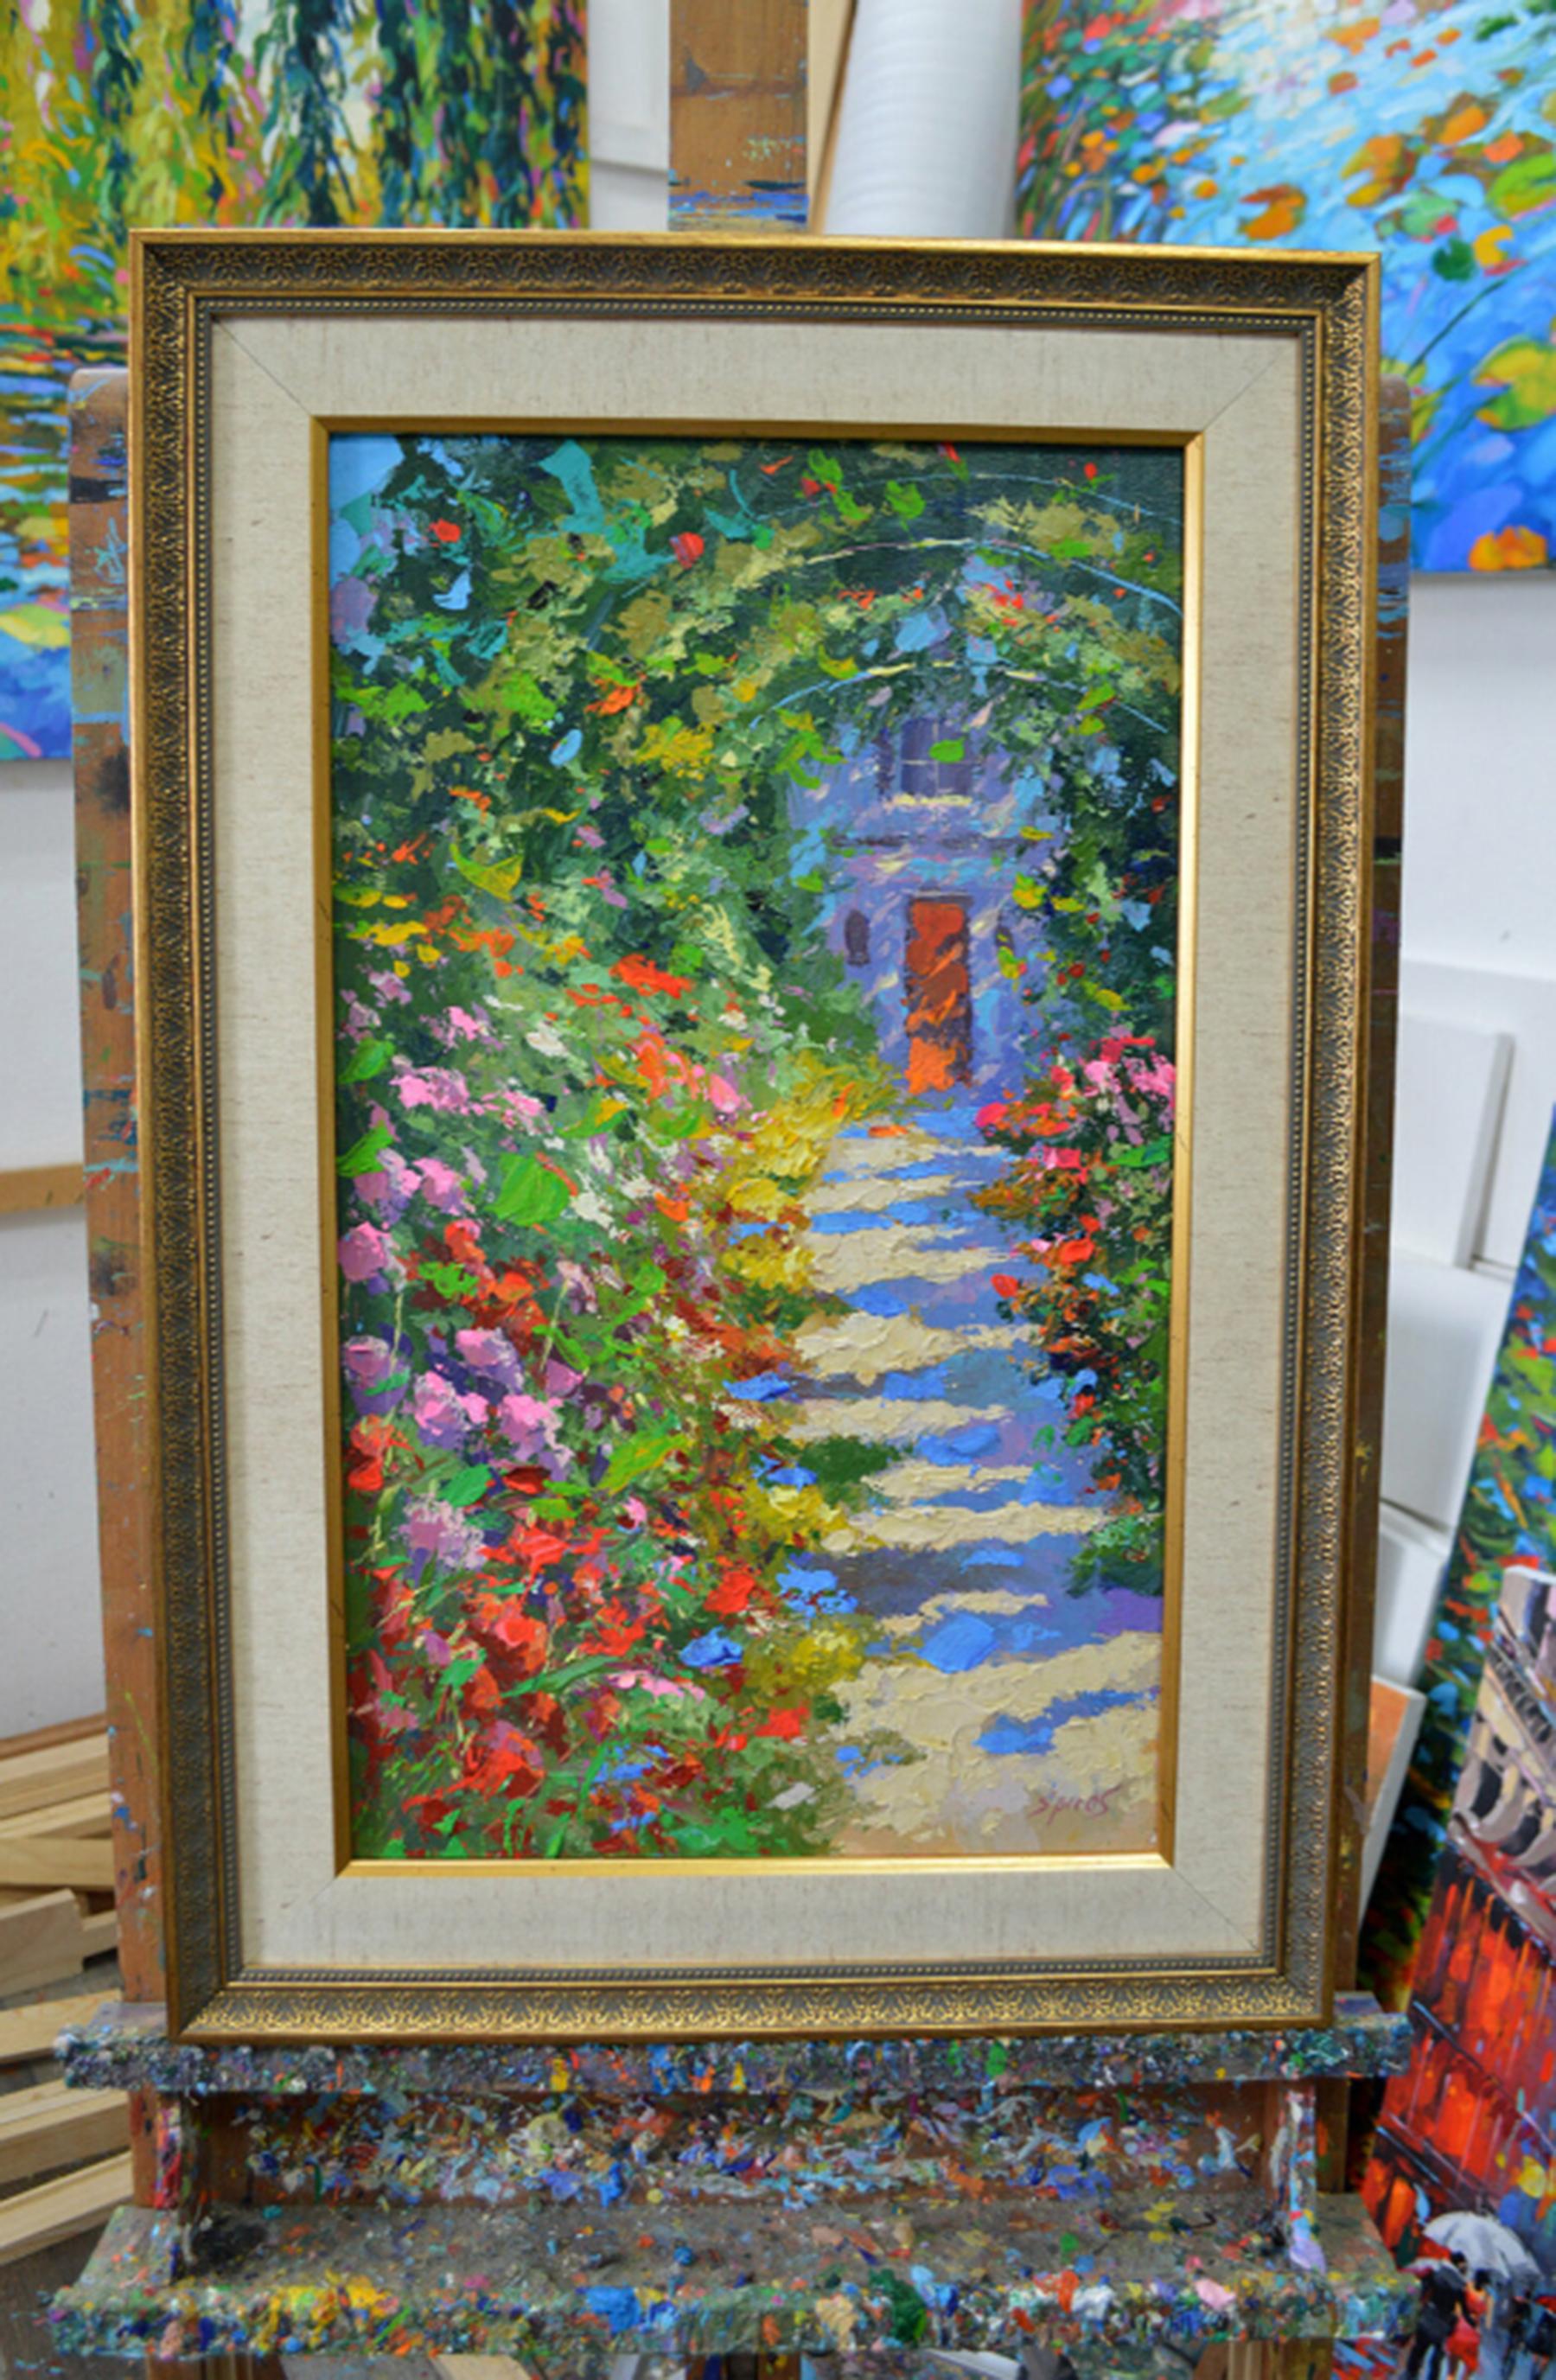 Alley in the garden - Painting by Dmitry Spiros